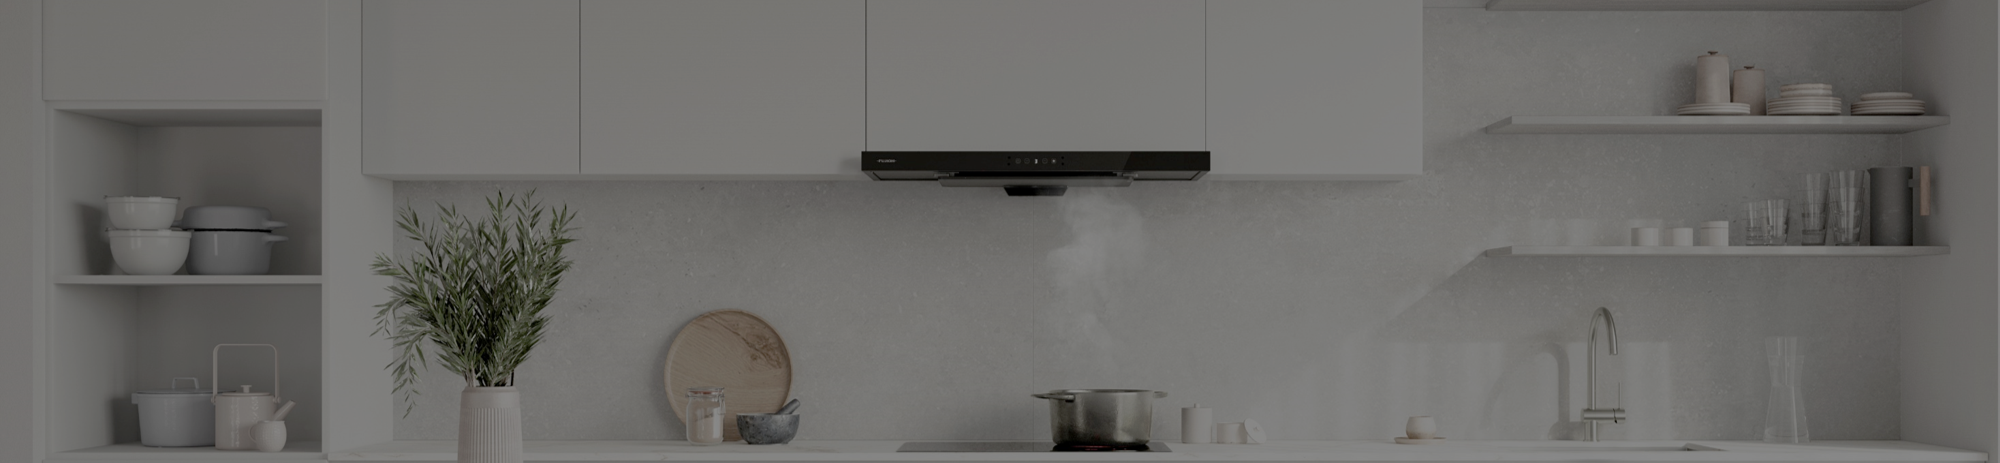 FUJIOH Cooker hoods- Blending style and function vol.1